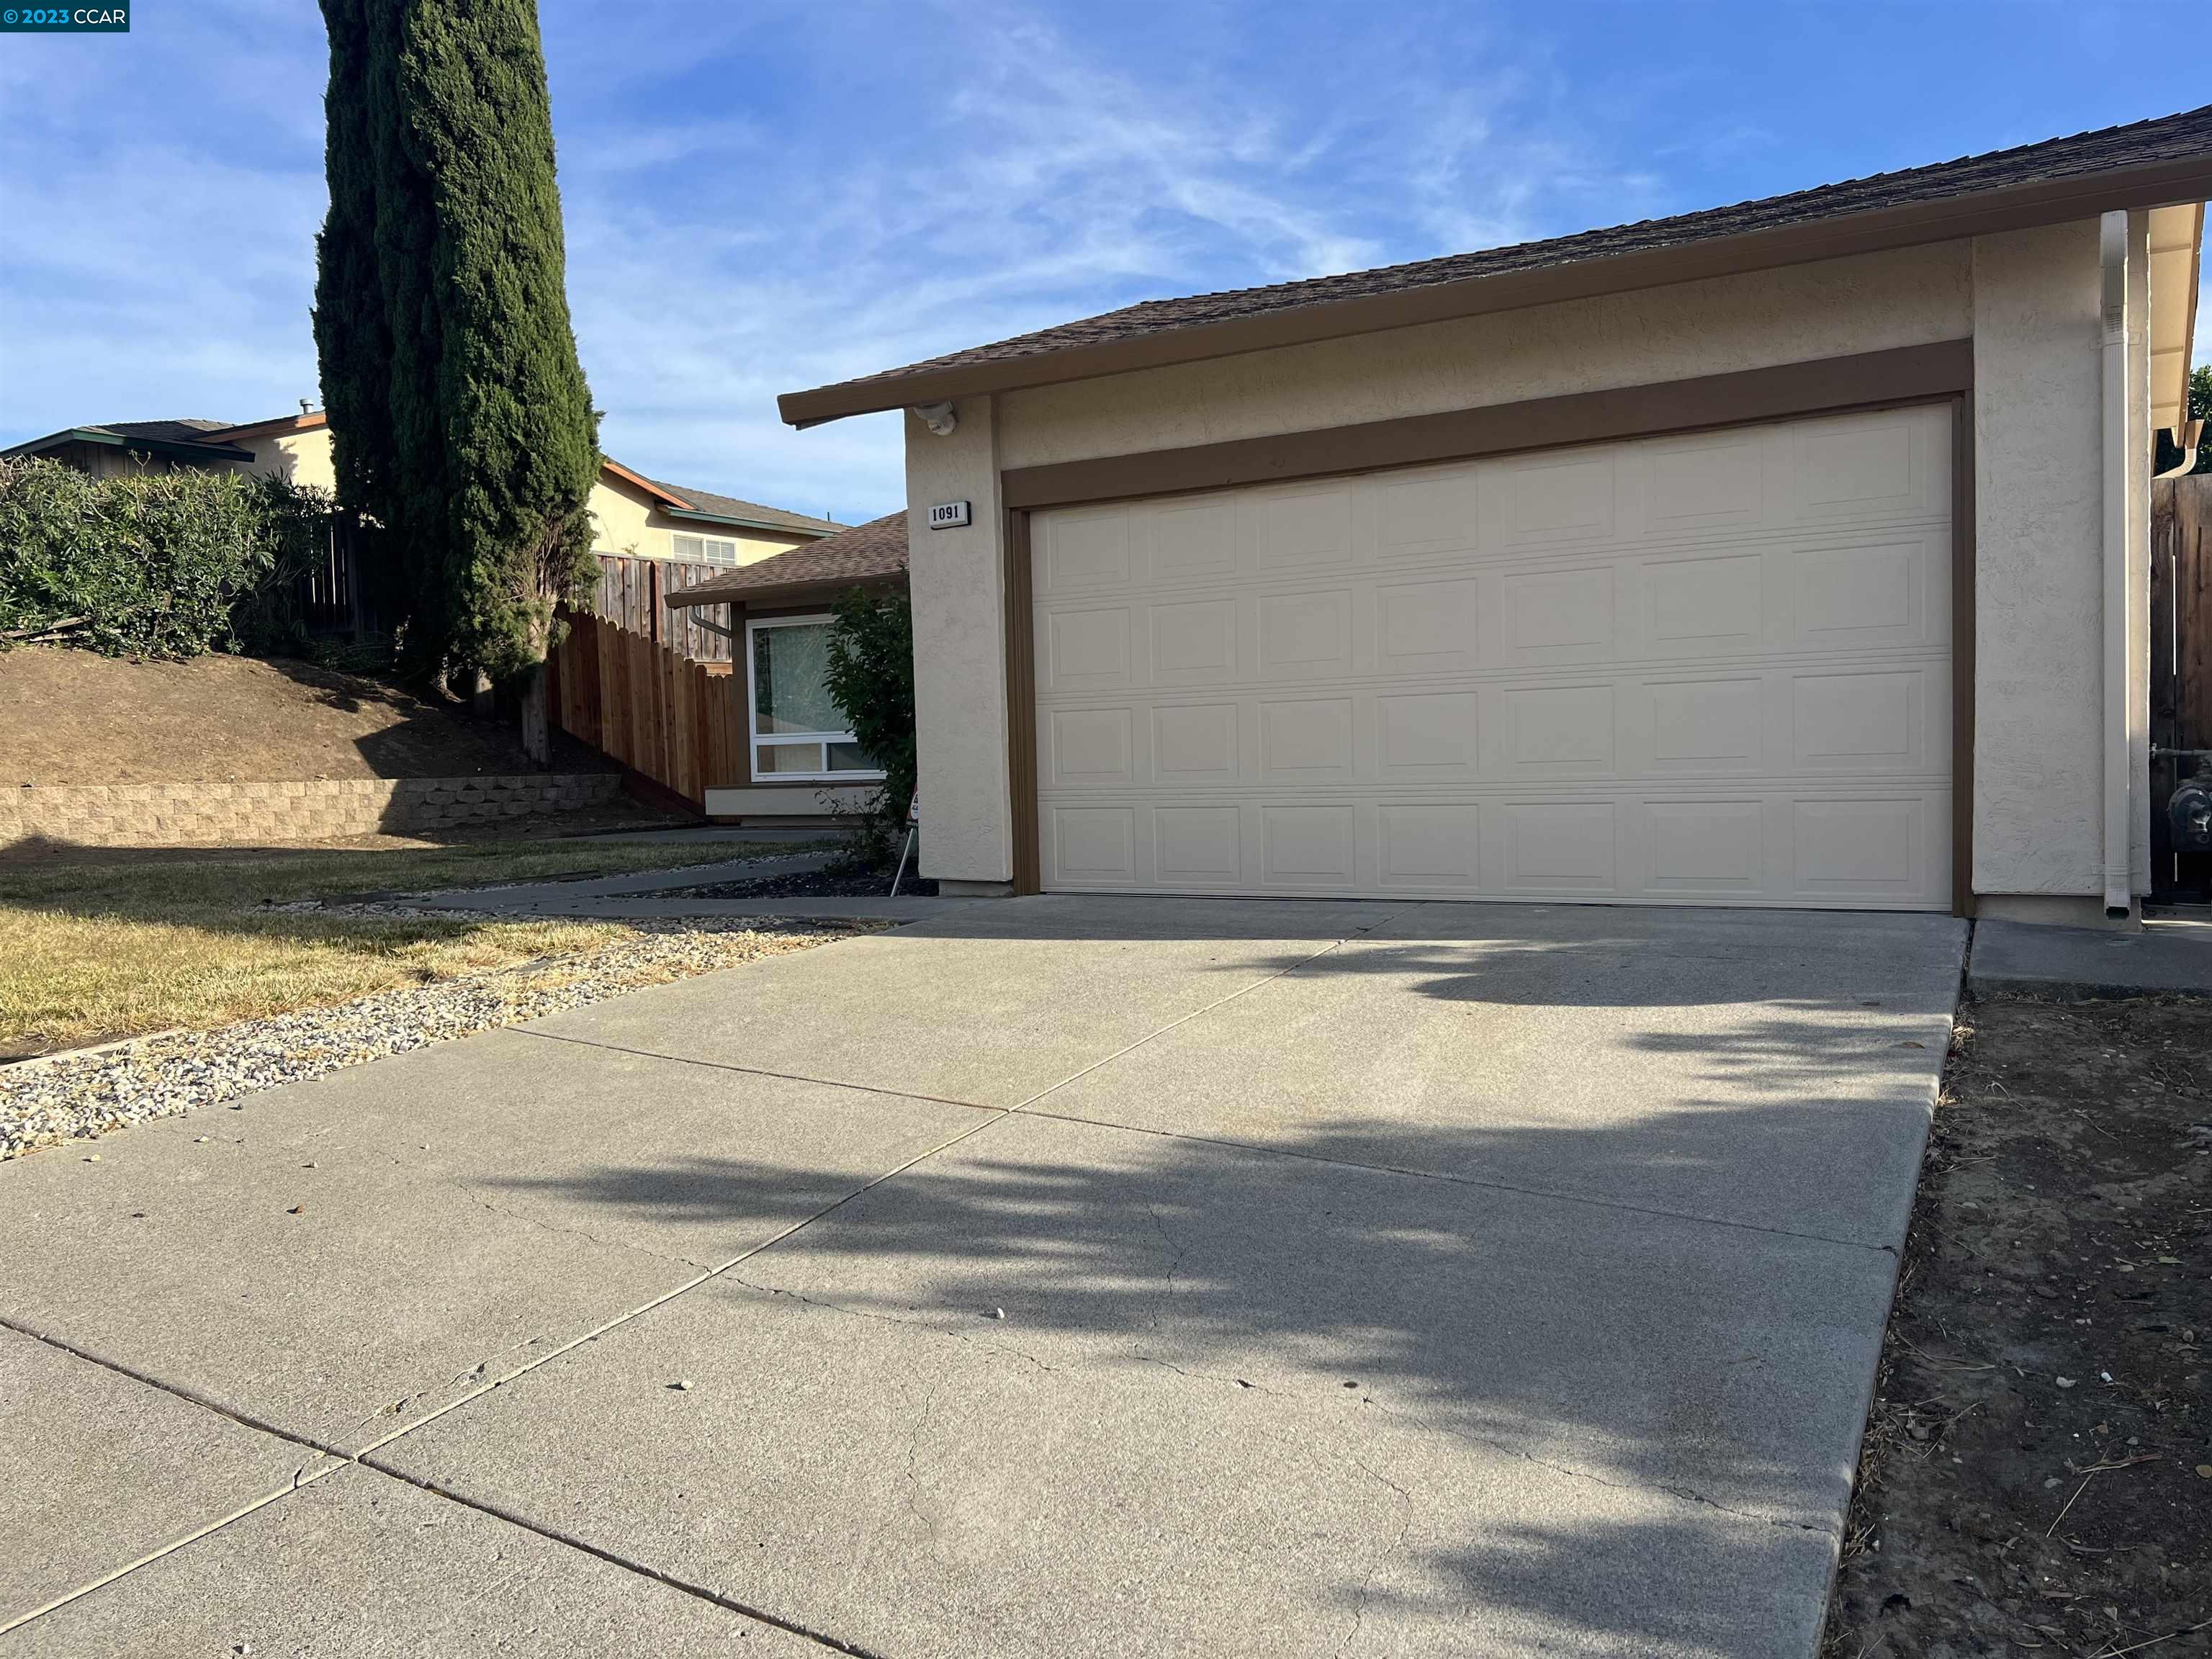 Location, Location, again location, Fabulous one-story house, beautifully updated, New updated bathrooms, New paints inside and outside. new carpet, and updated closets too.  Ready for new tenants. 3 minutes from shopping and freeway. For appointment, please text or Call Anton 925-899-6993